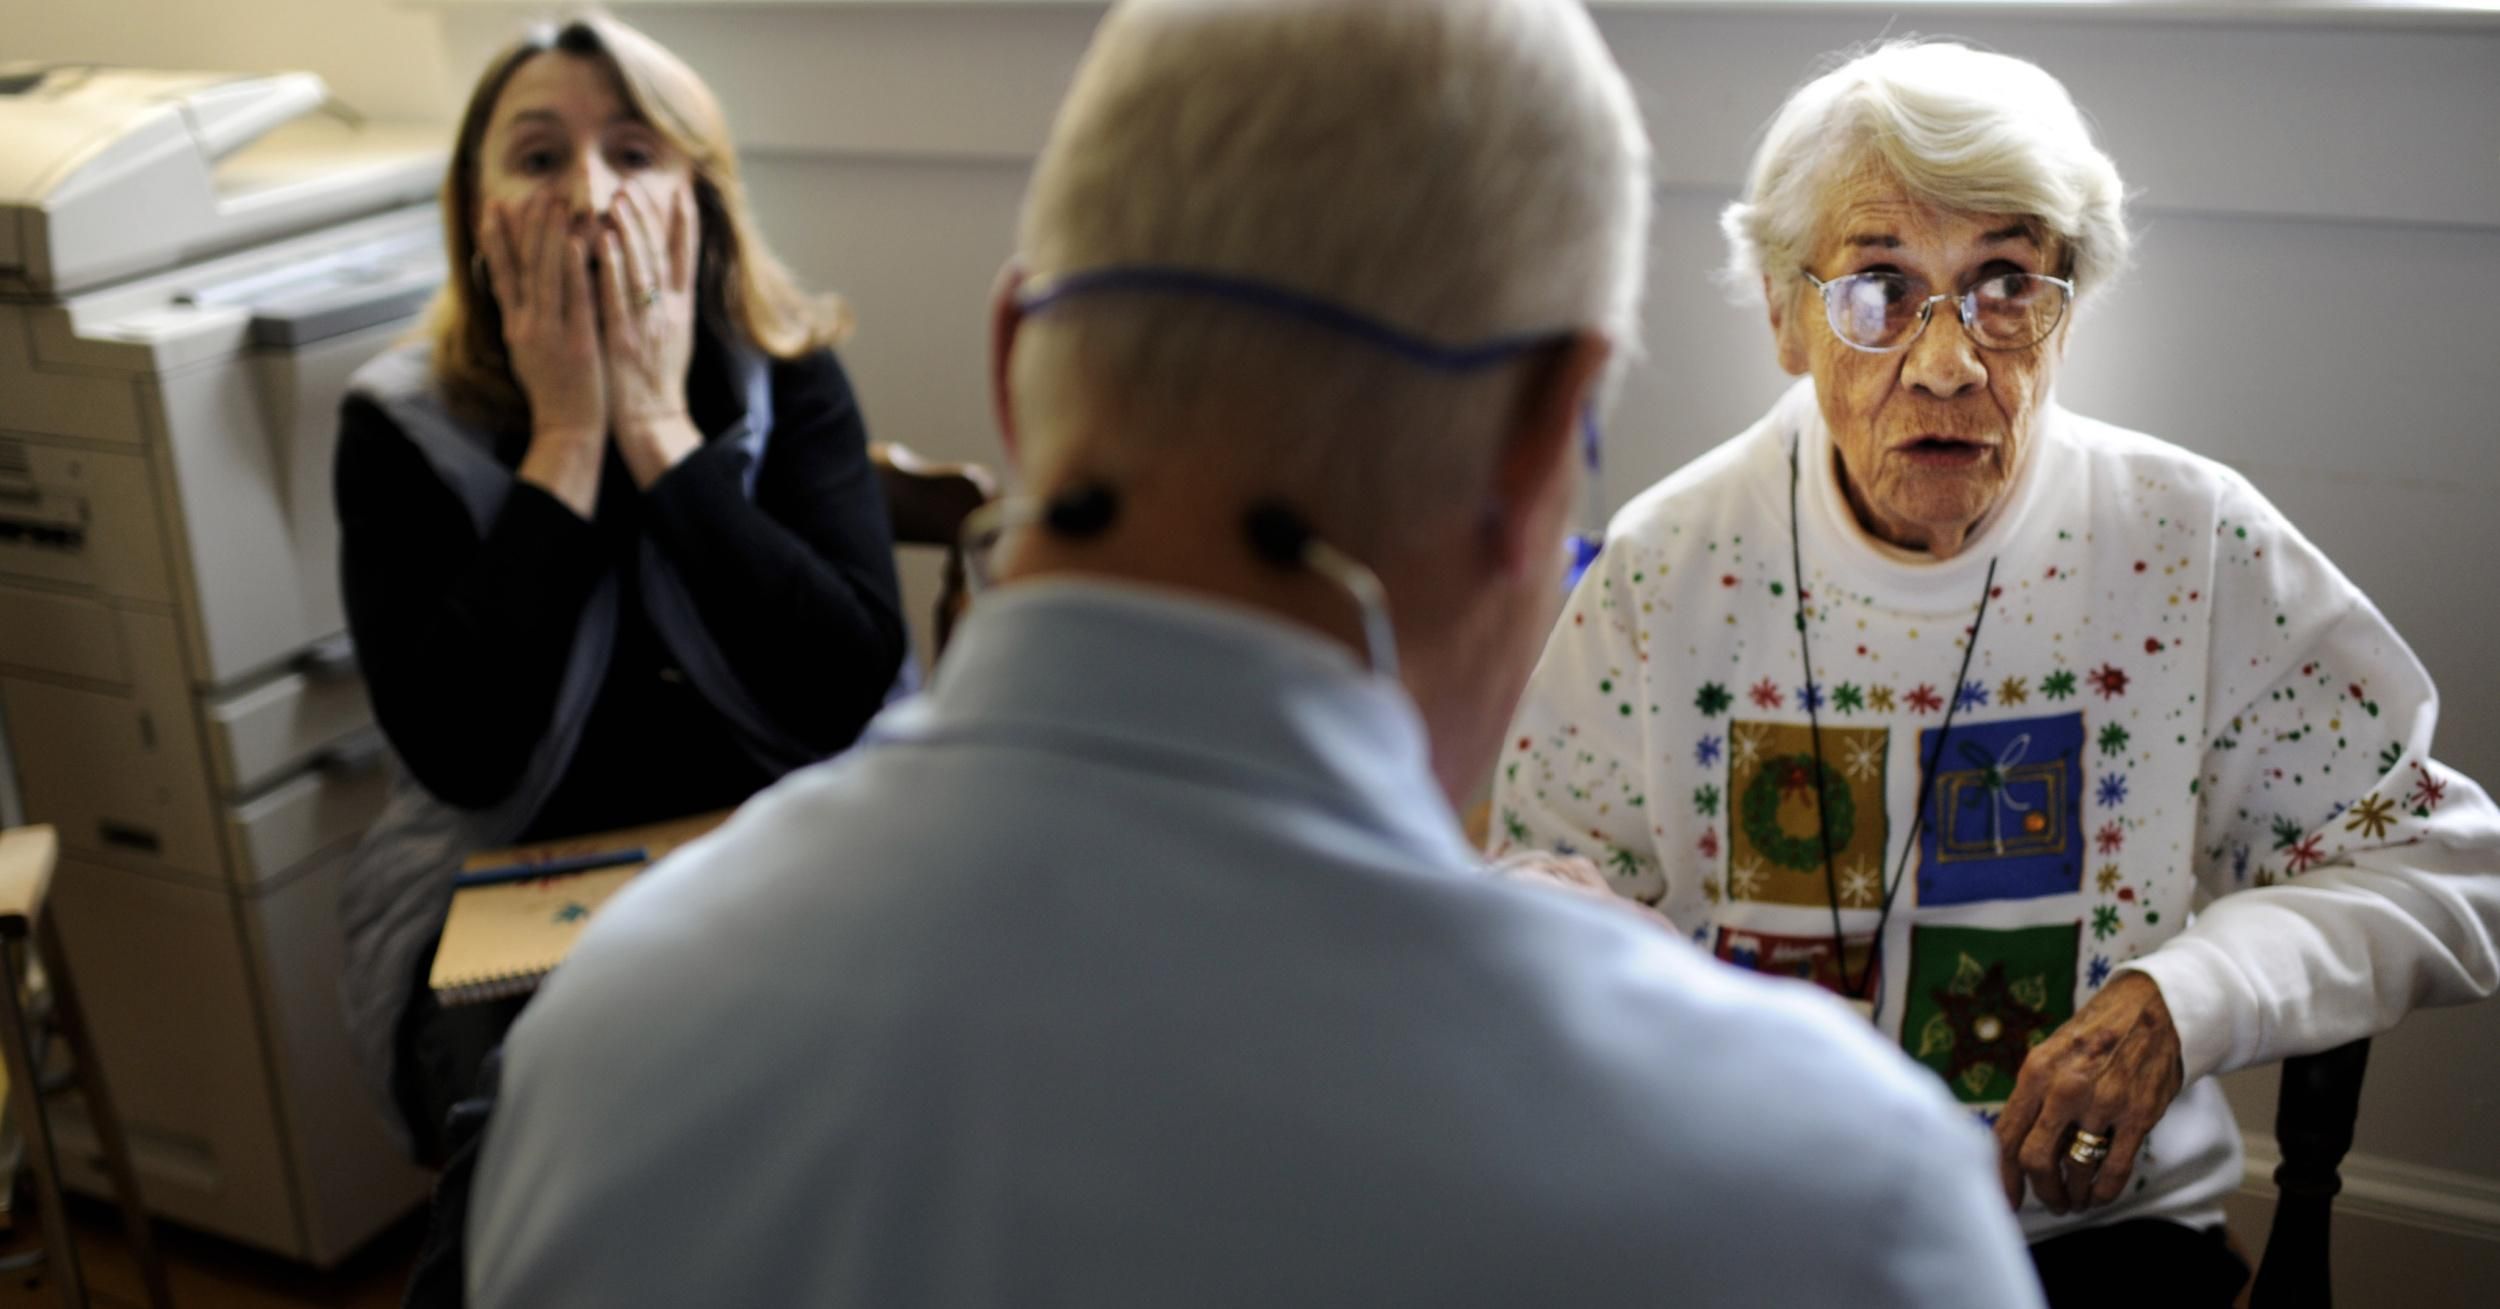 Doctor Emory Lewis gives a memory test to new Medicare patient, Helen Kinne, 88-years-old, while a concerned daughter, Deborah Kinne, looks on, at the family clinic in Reedville, Virginia, Monday, December 12, 2011. With approximately 65 percent of his patients insured by Medicare, Doctor Lewis, is closely watching the upcoming DocFix vote in Congress. (Photo by Melina Mara/The Washington Post via Getty Images)